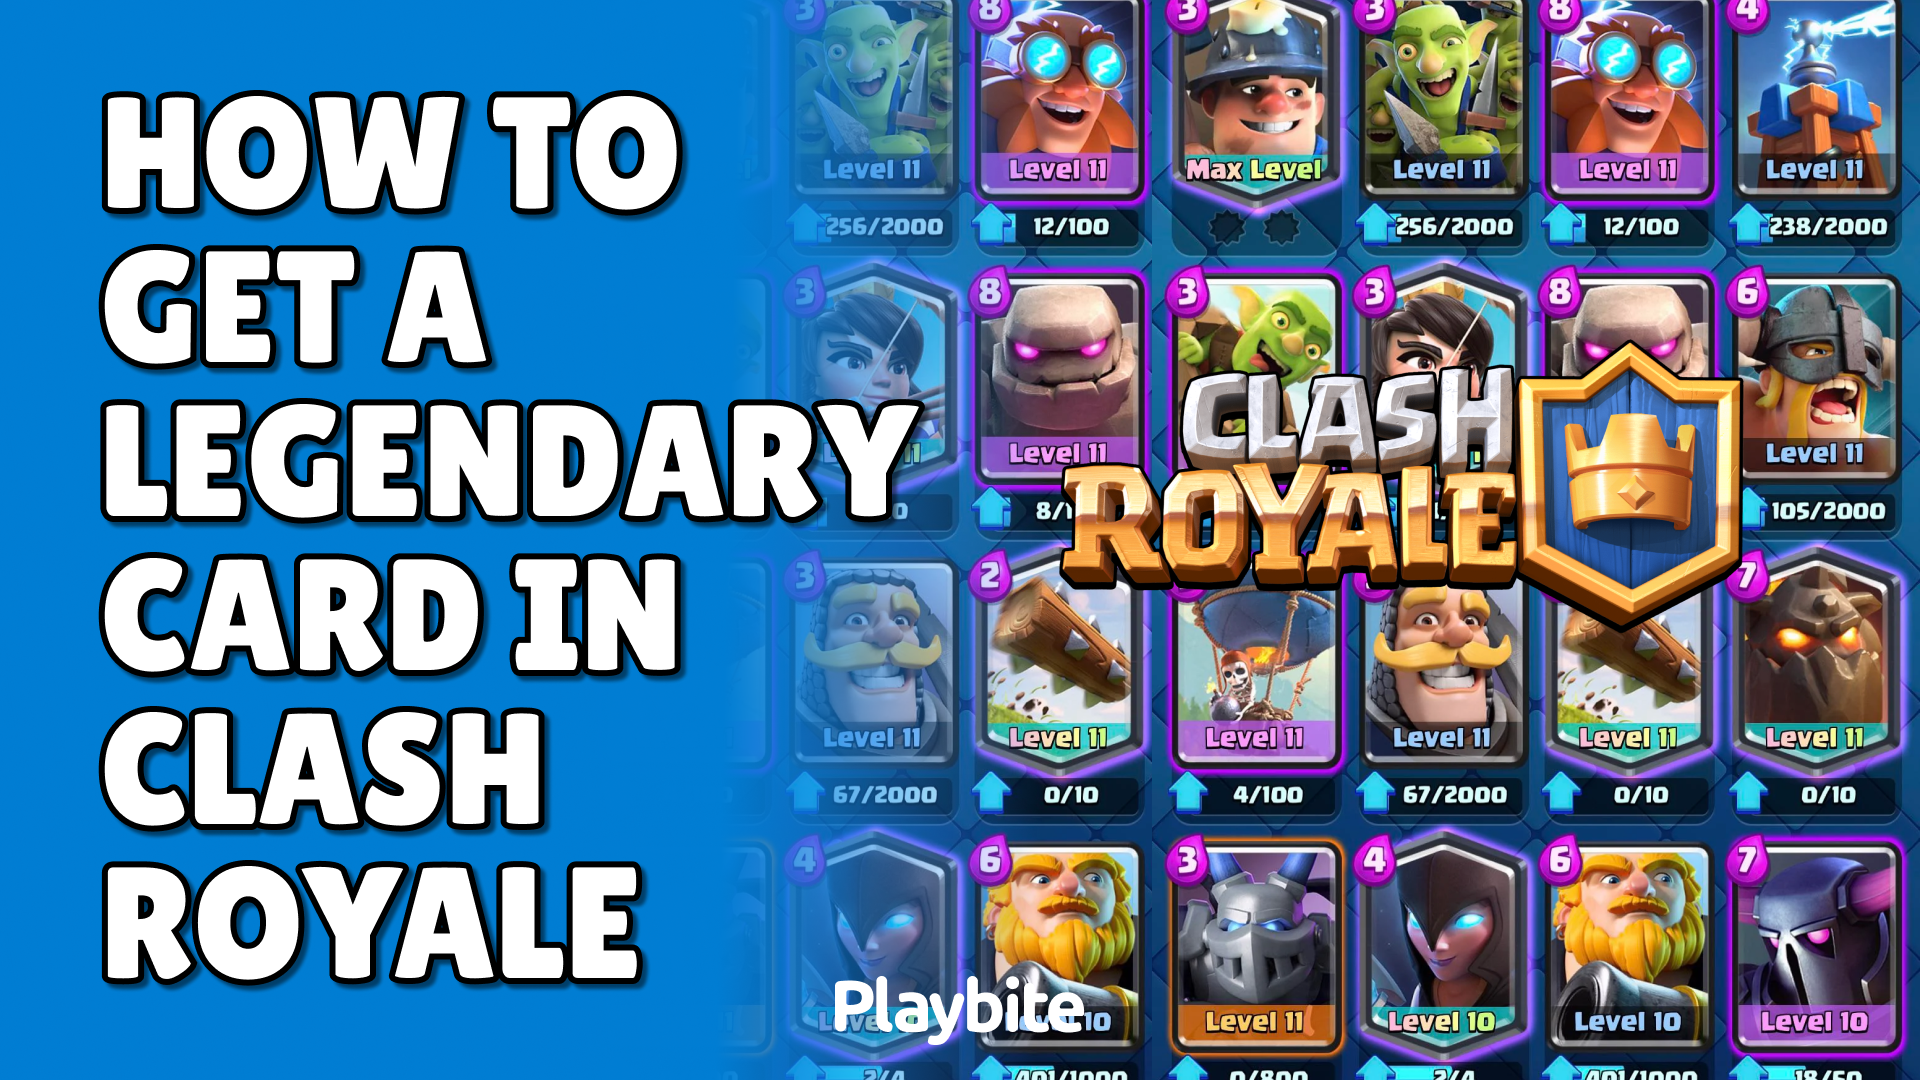 How To Get A Legendary Card In Clash Royale